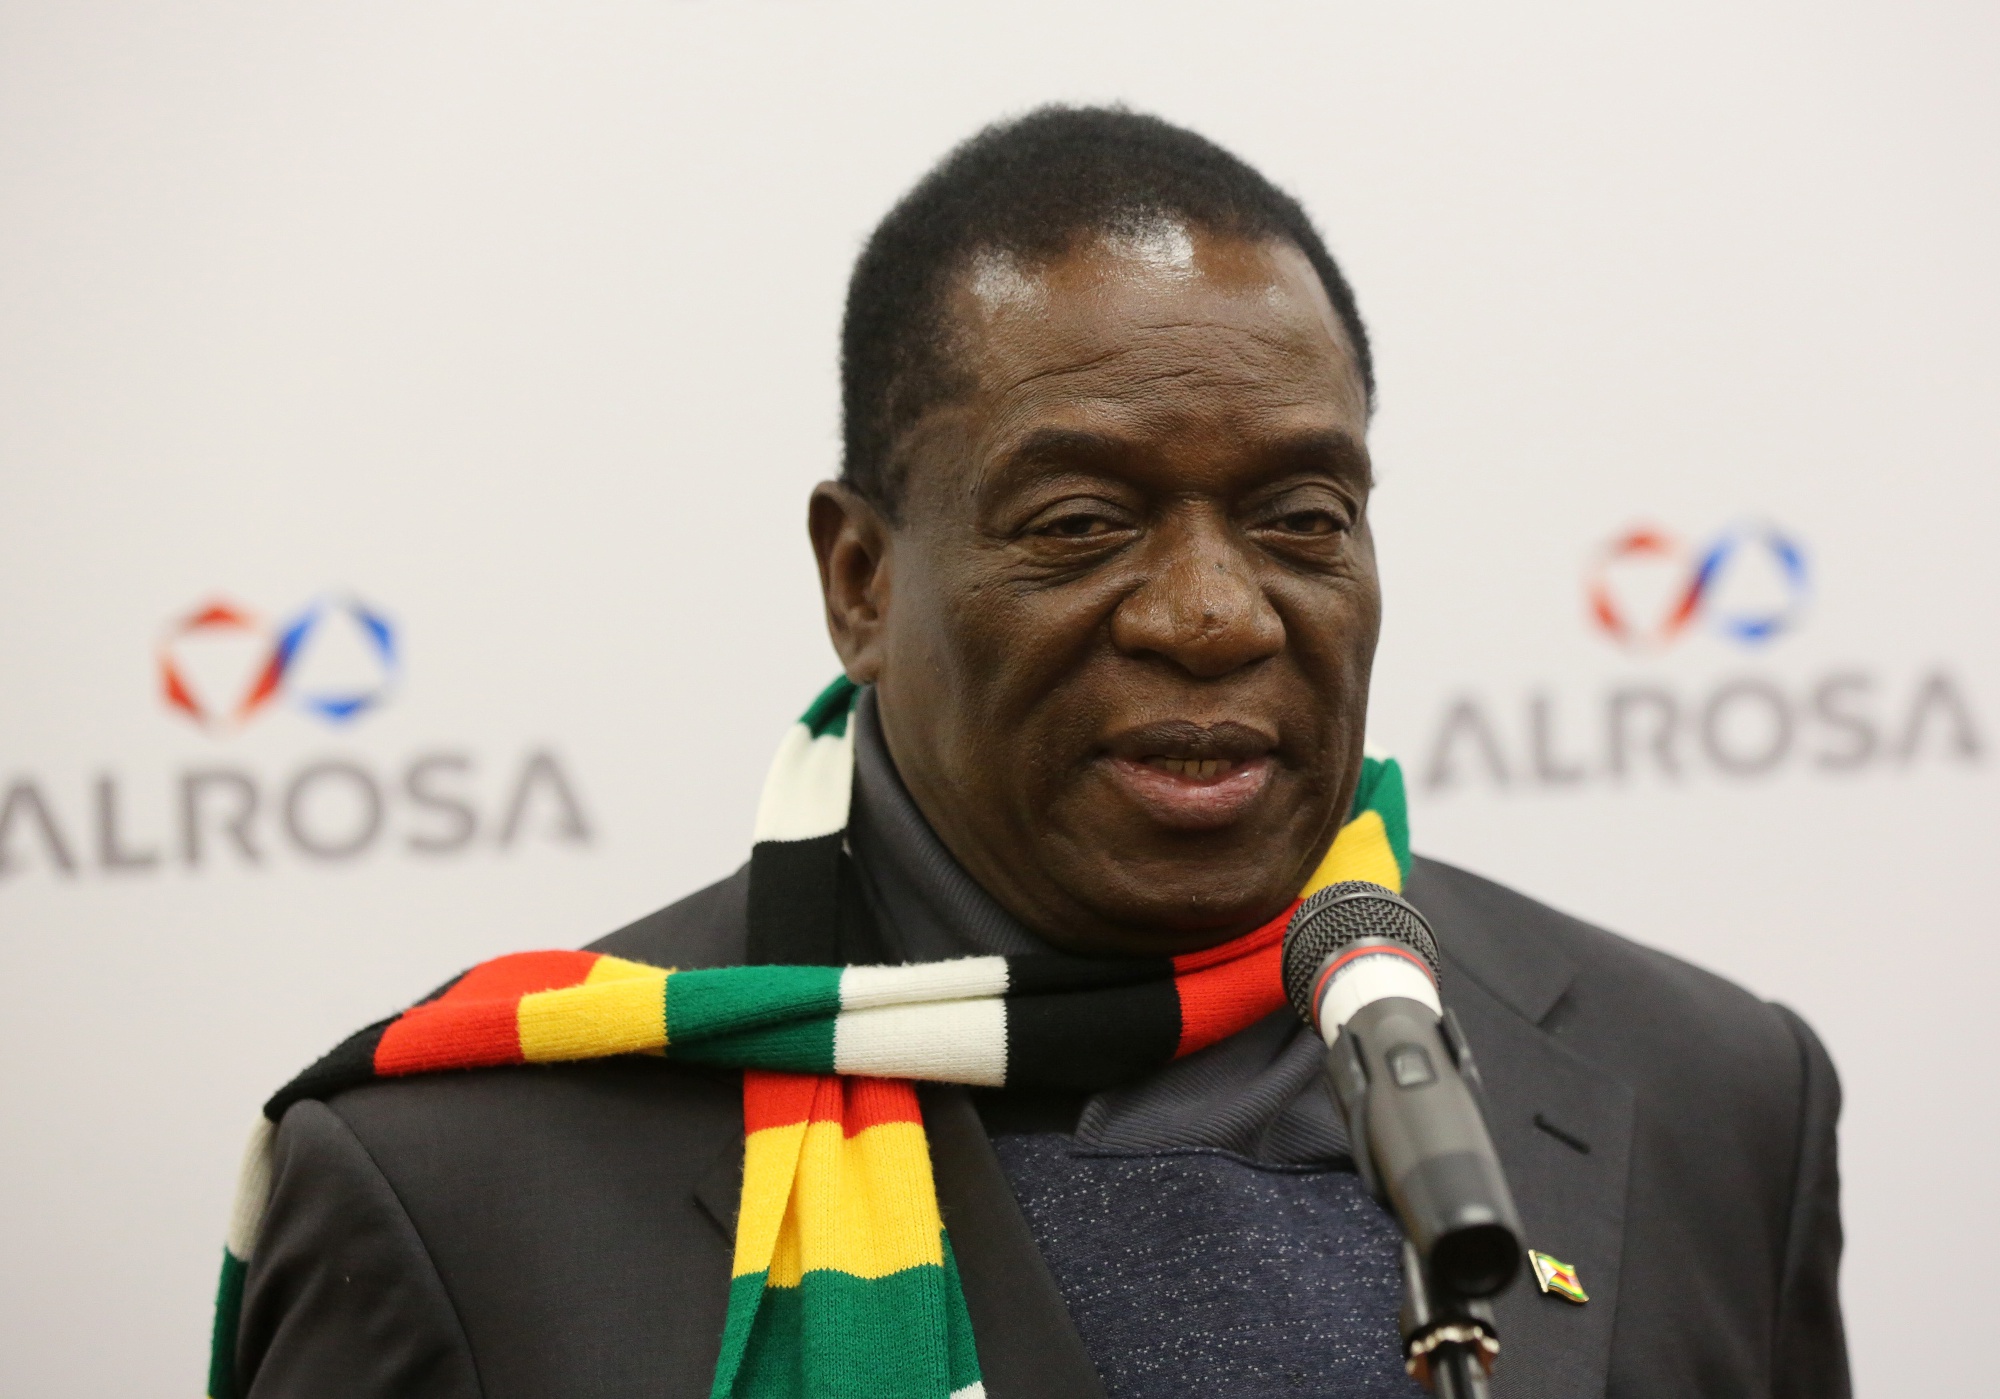 Emmerson Mnangagwa, Zimbabwe's president, left, speaks during a news conference.